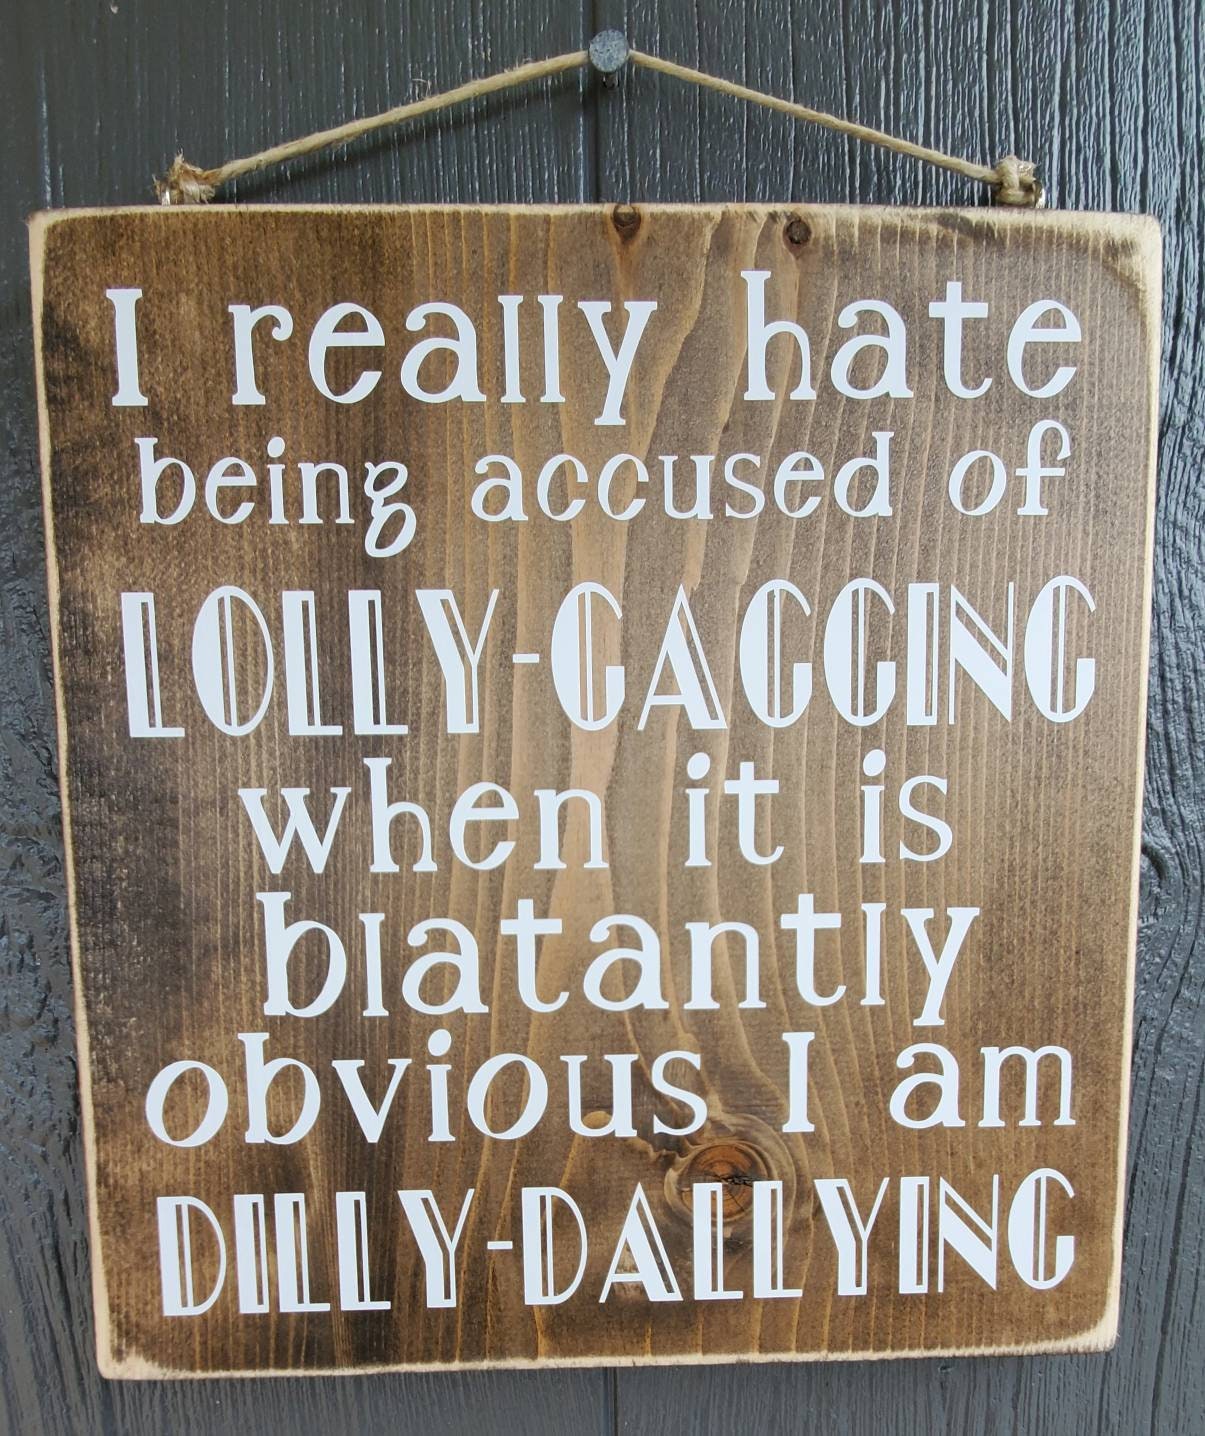 I hate it when people accuse me of Lollygagging when it's quite clear I am  Dillydallying | Kids T-Shirt